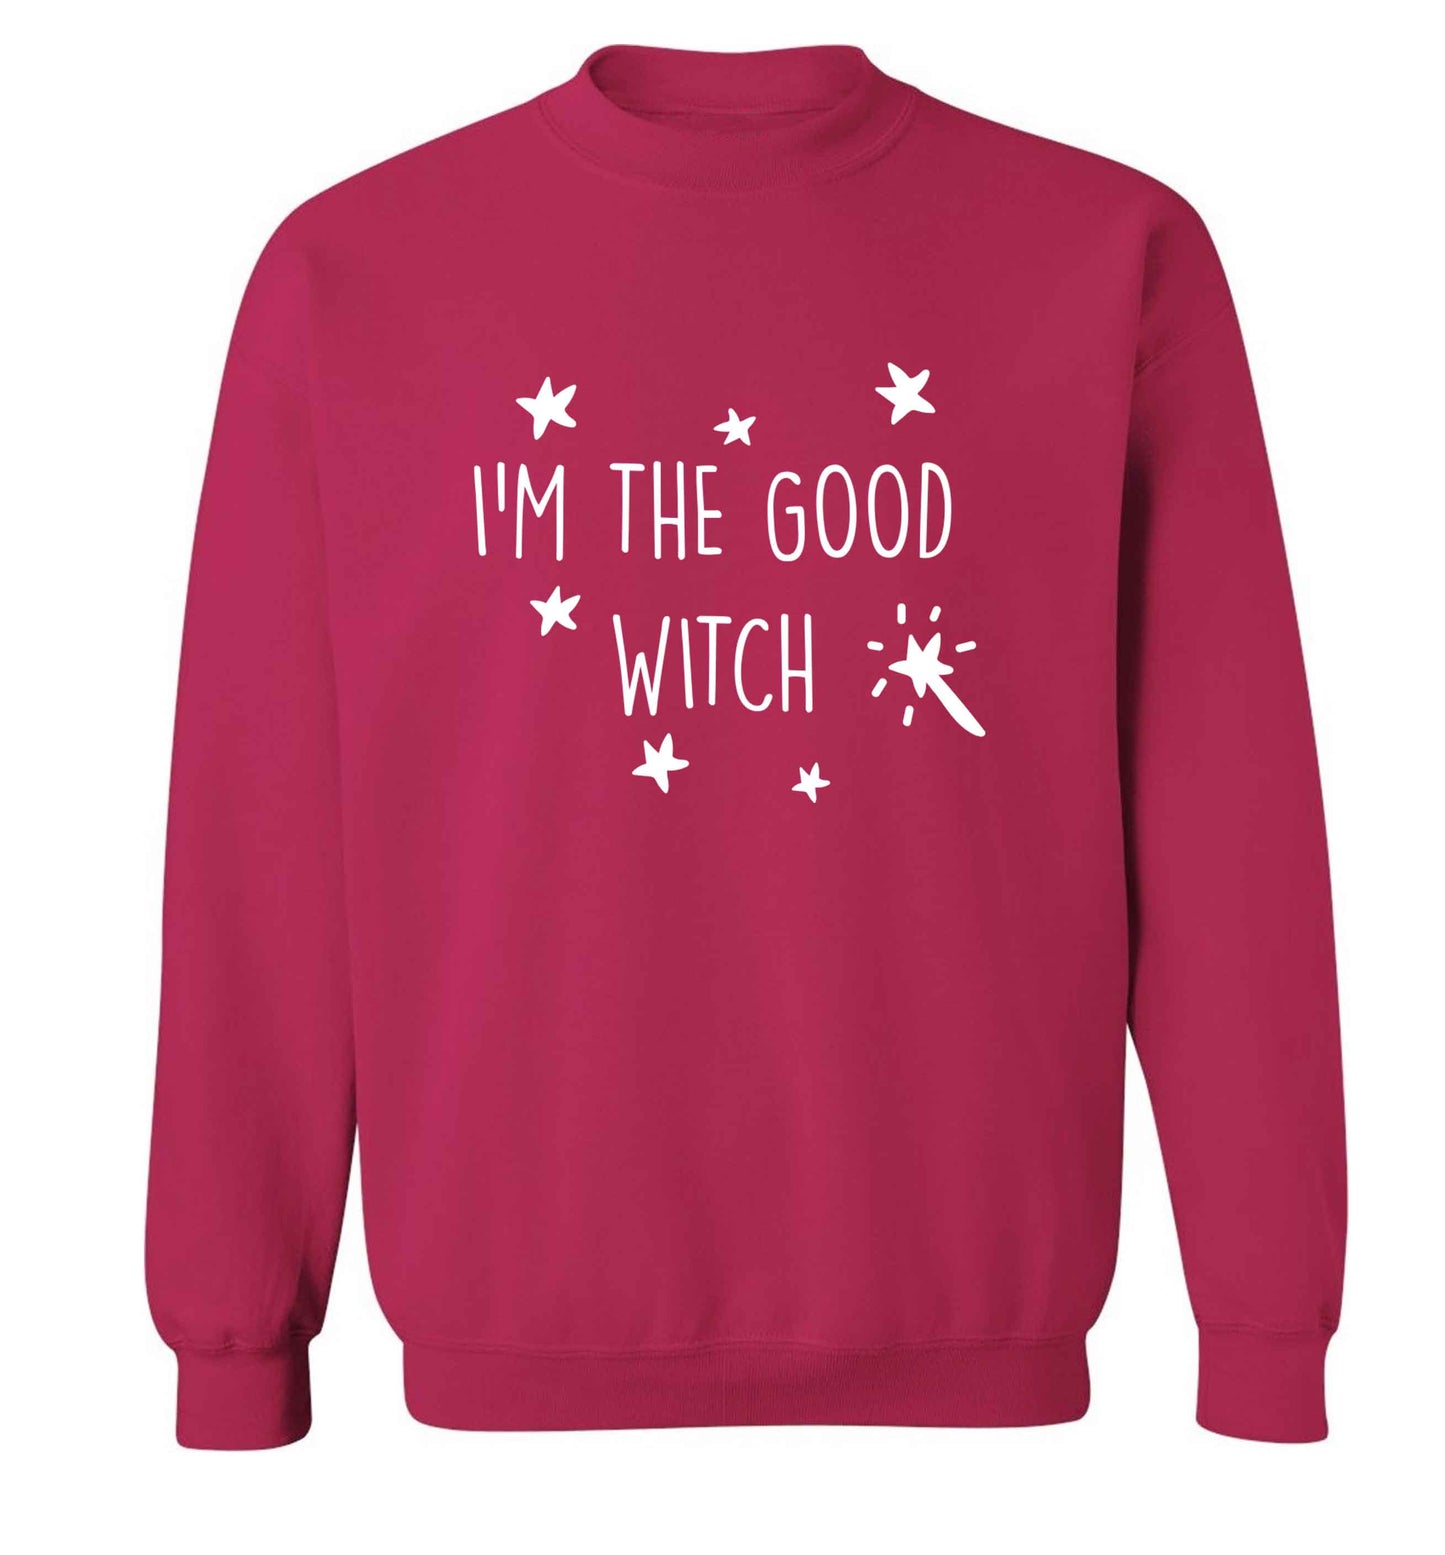 Good witch adult's unisex pink sweater 2XL